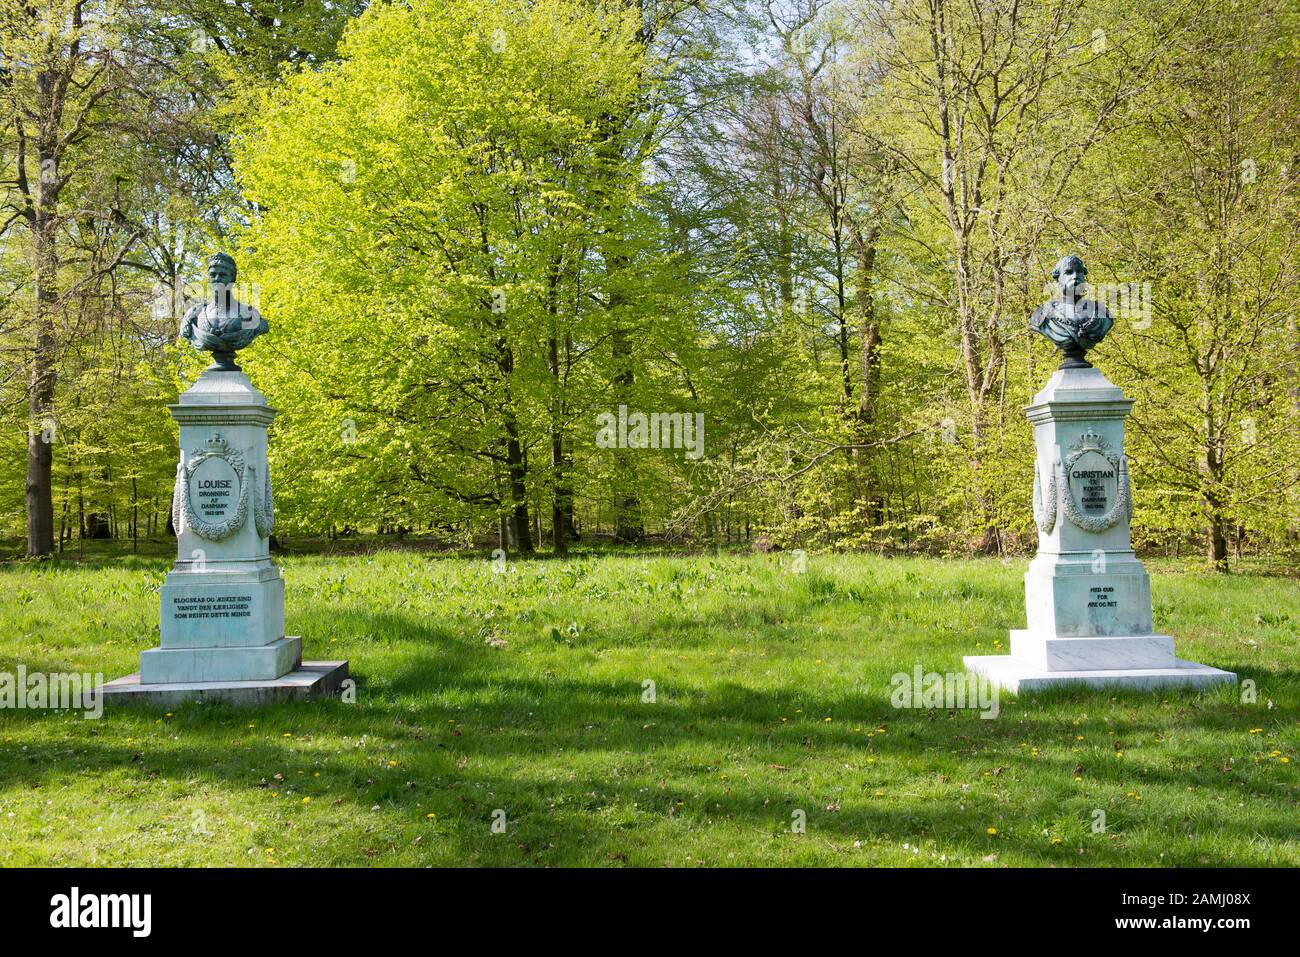 Statue of Louise queen of Denmark and Christian IX king of Denmark at Fredensborg Palace park Stock Photo